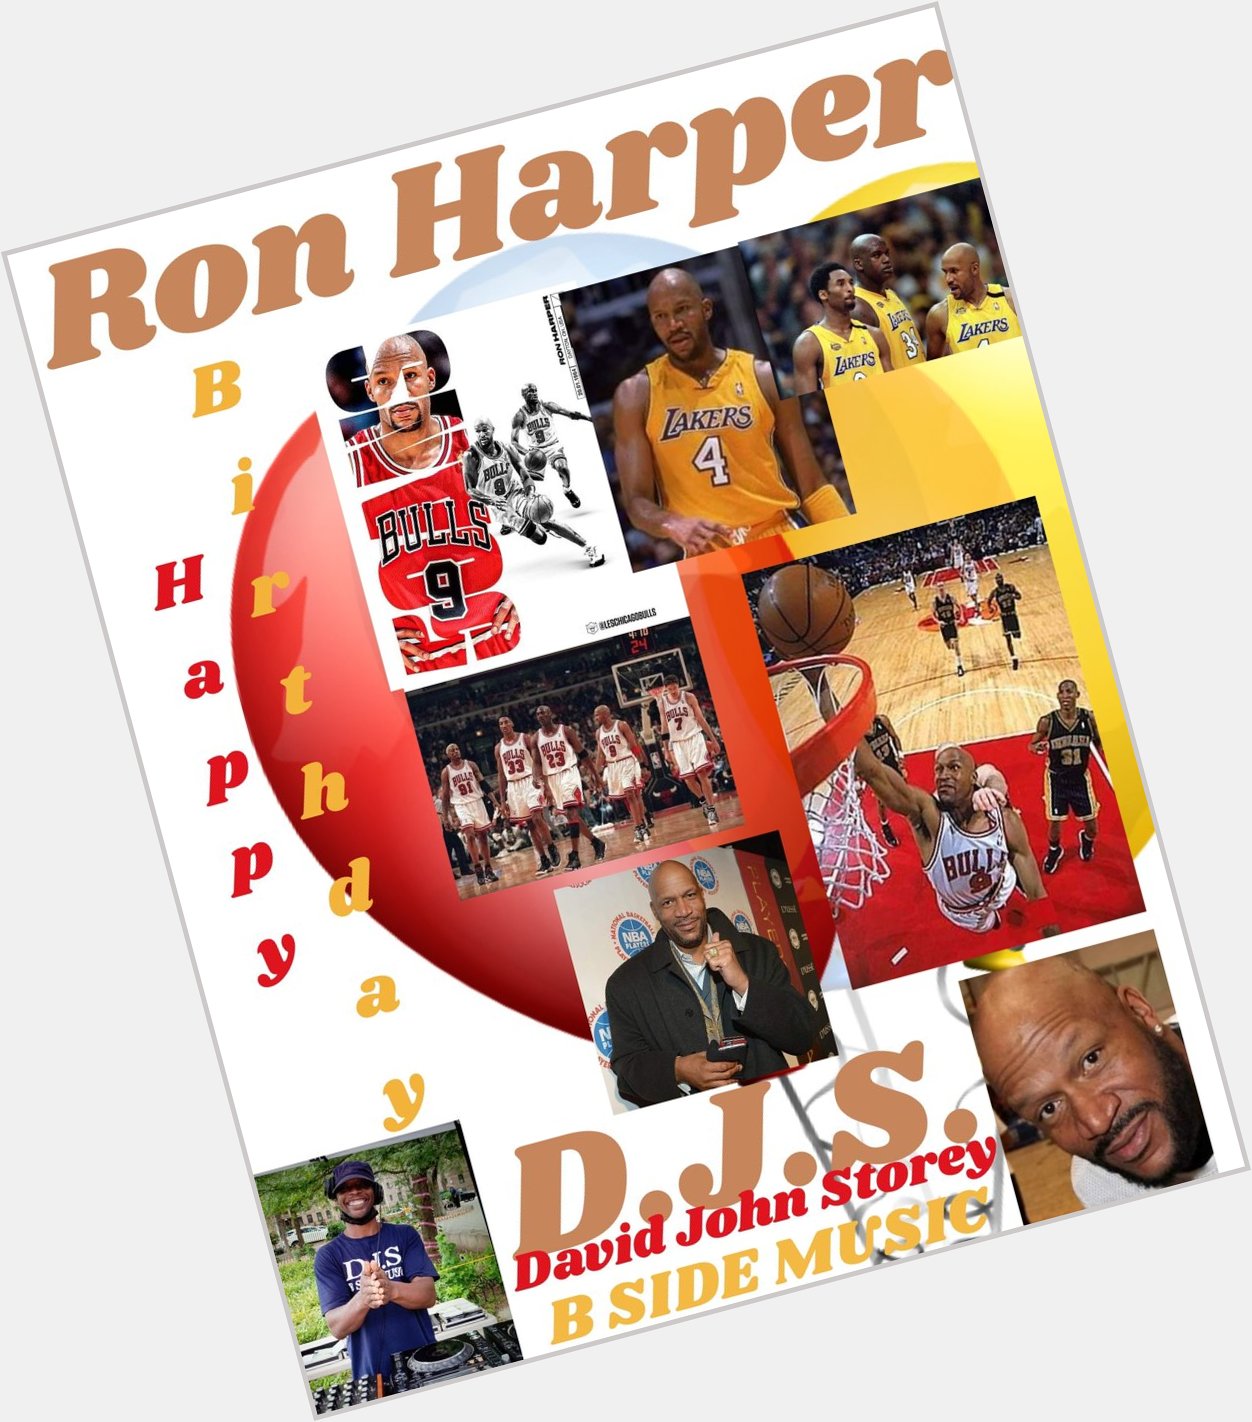 I(D.J.S.)\"B SIDE\" taking time to say Happy Belated Birthday to five-time NBA Champion: \"RON HARPER\"!!!! 